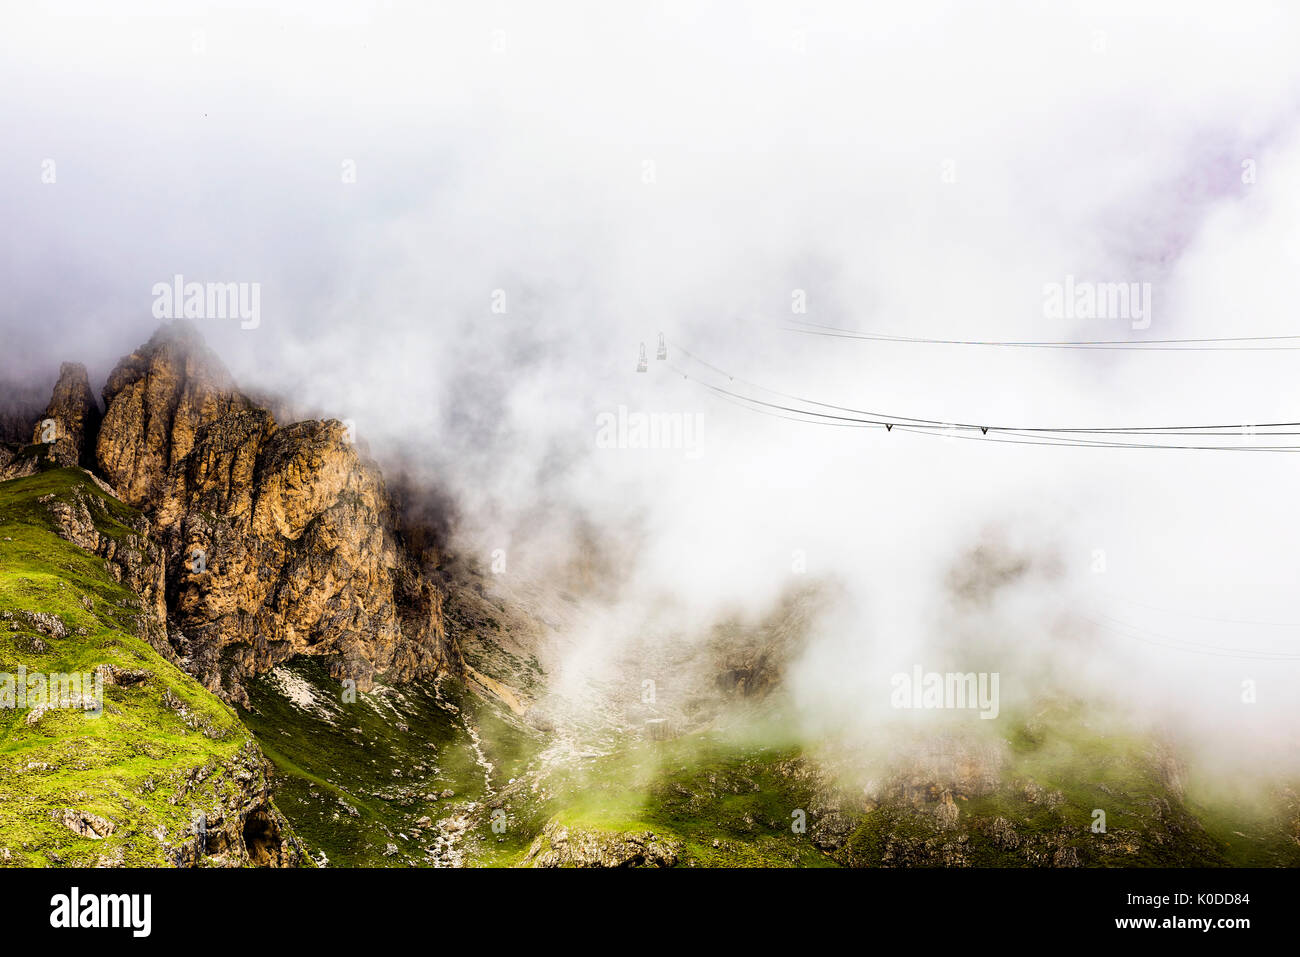 Sass Pordoi is one of the most visited mountains of the Dolomites. A cable-car, just visible as it enters the clouds, leads up from the road pass. Stock Photo